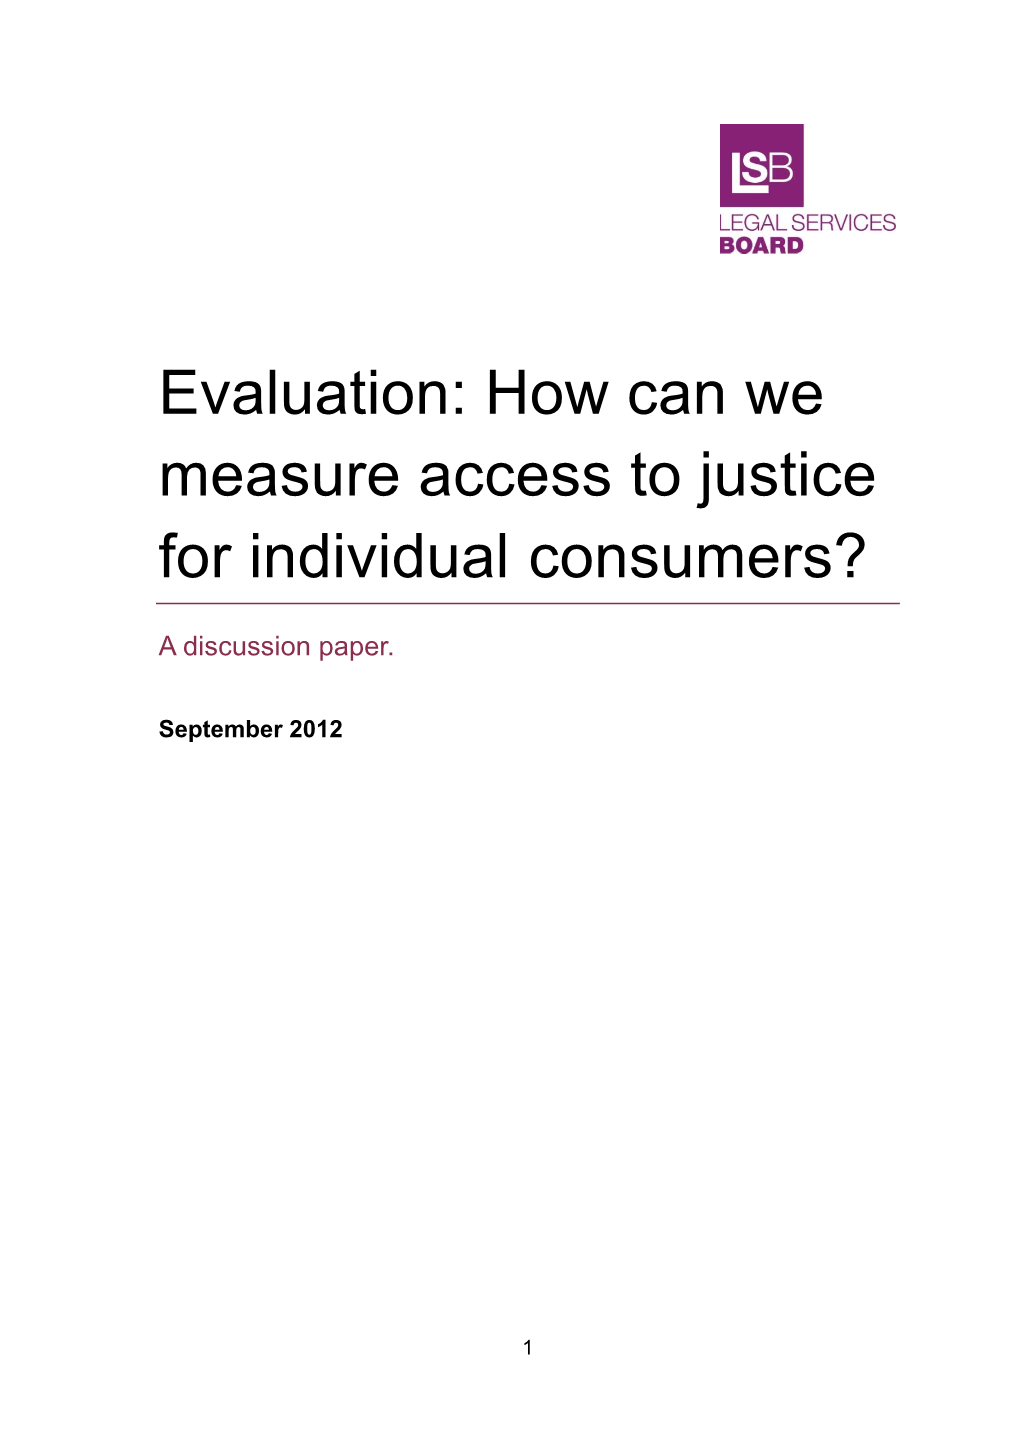 How Can We Measure Access to Justice for Individual Consumers?